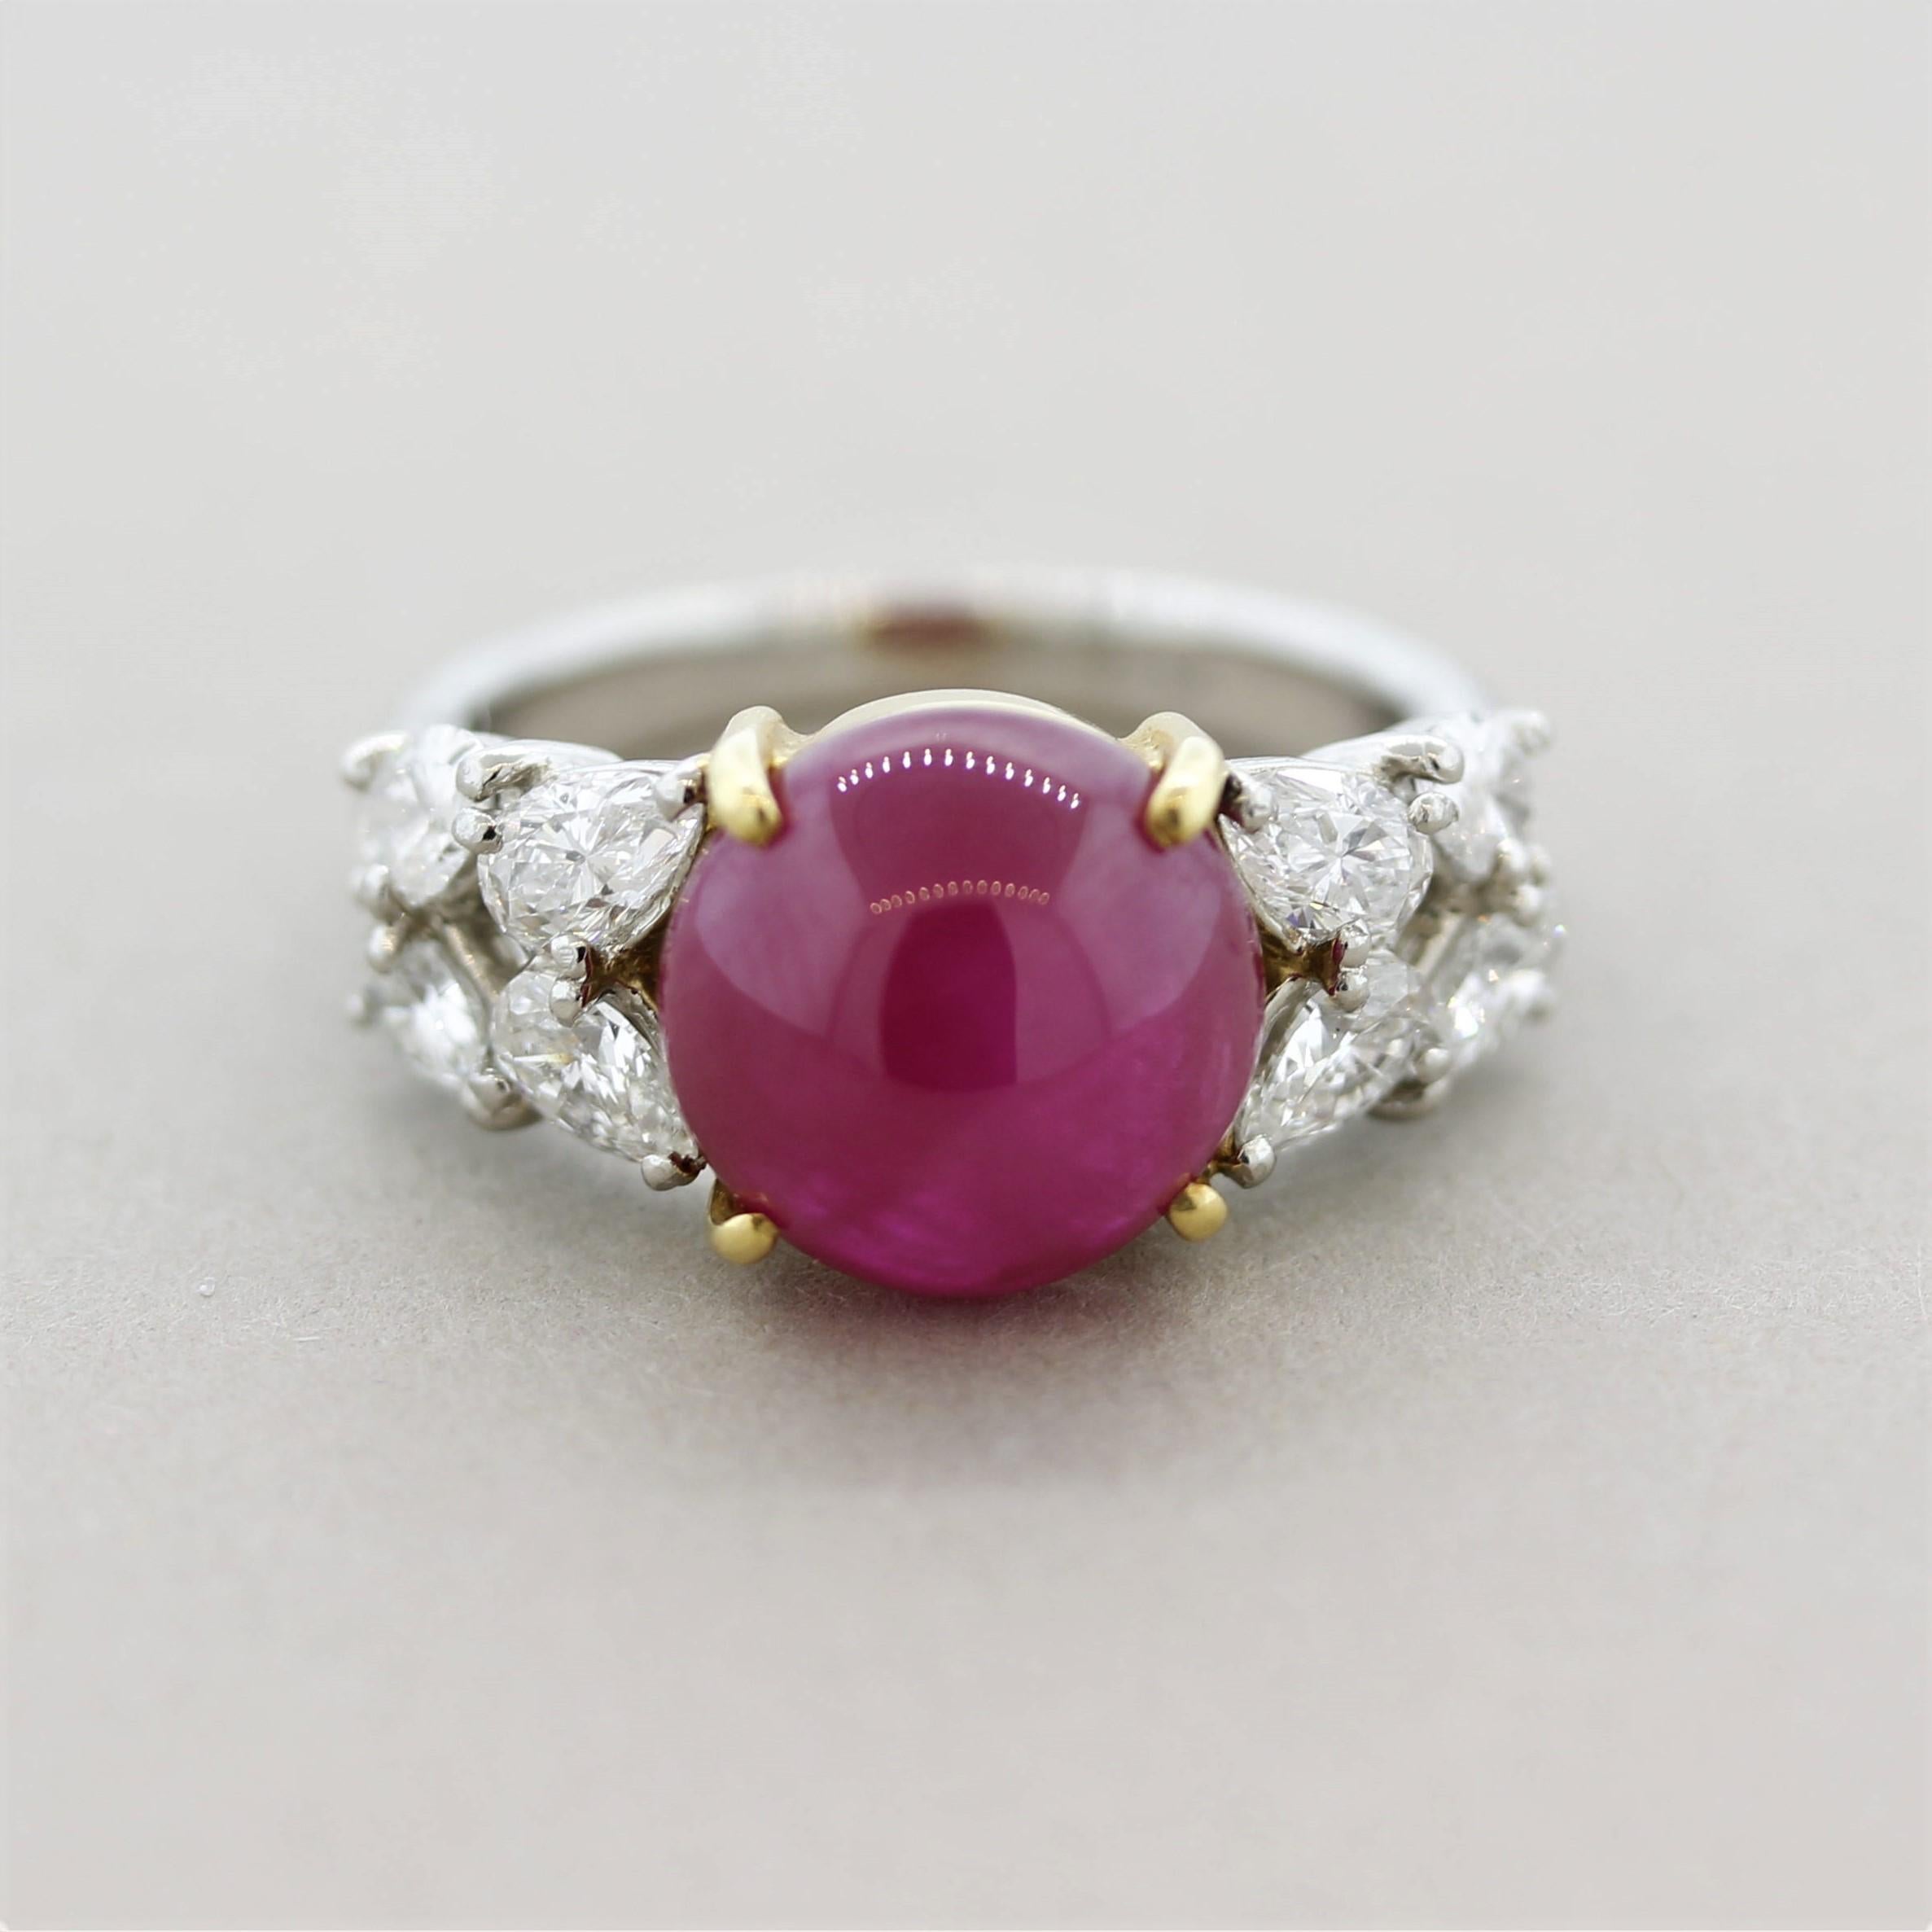 A luscious 6.30 carat ruby takes center stage! The cabochon gem has a bright evenly red color with excellent luster as light rolls across its surface. It is accented by 8 large pear-shape diamonds set on its sides weighing a total of 1.27 carats.